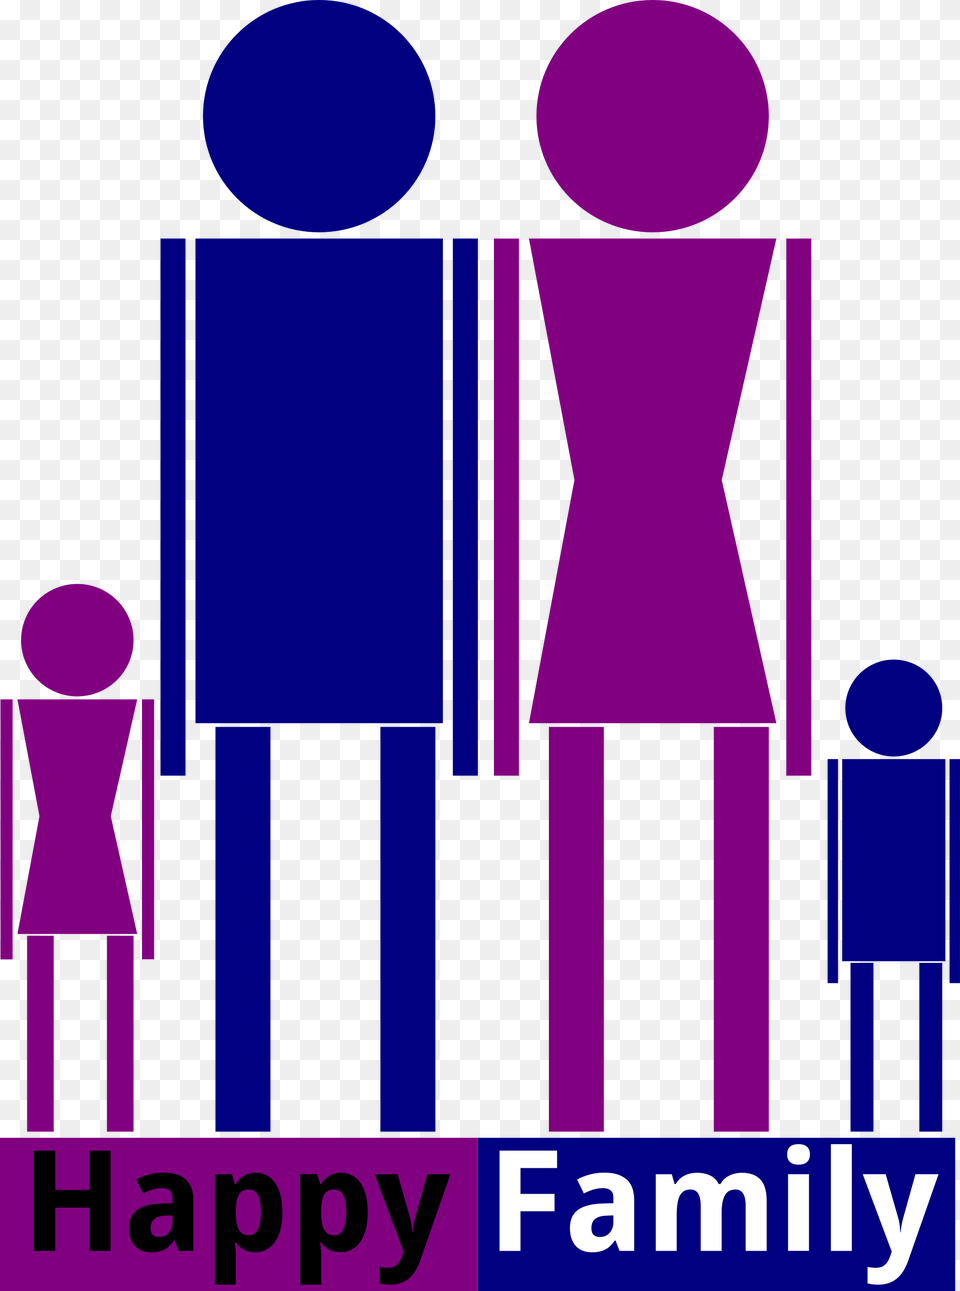 This Icons Design Of Happy Family, Purple Png